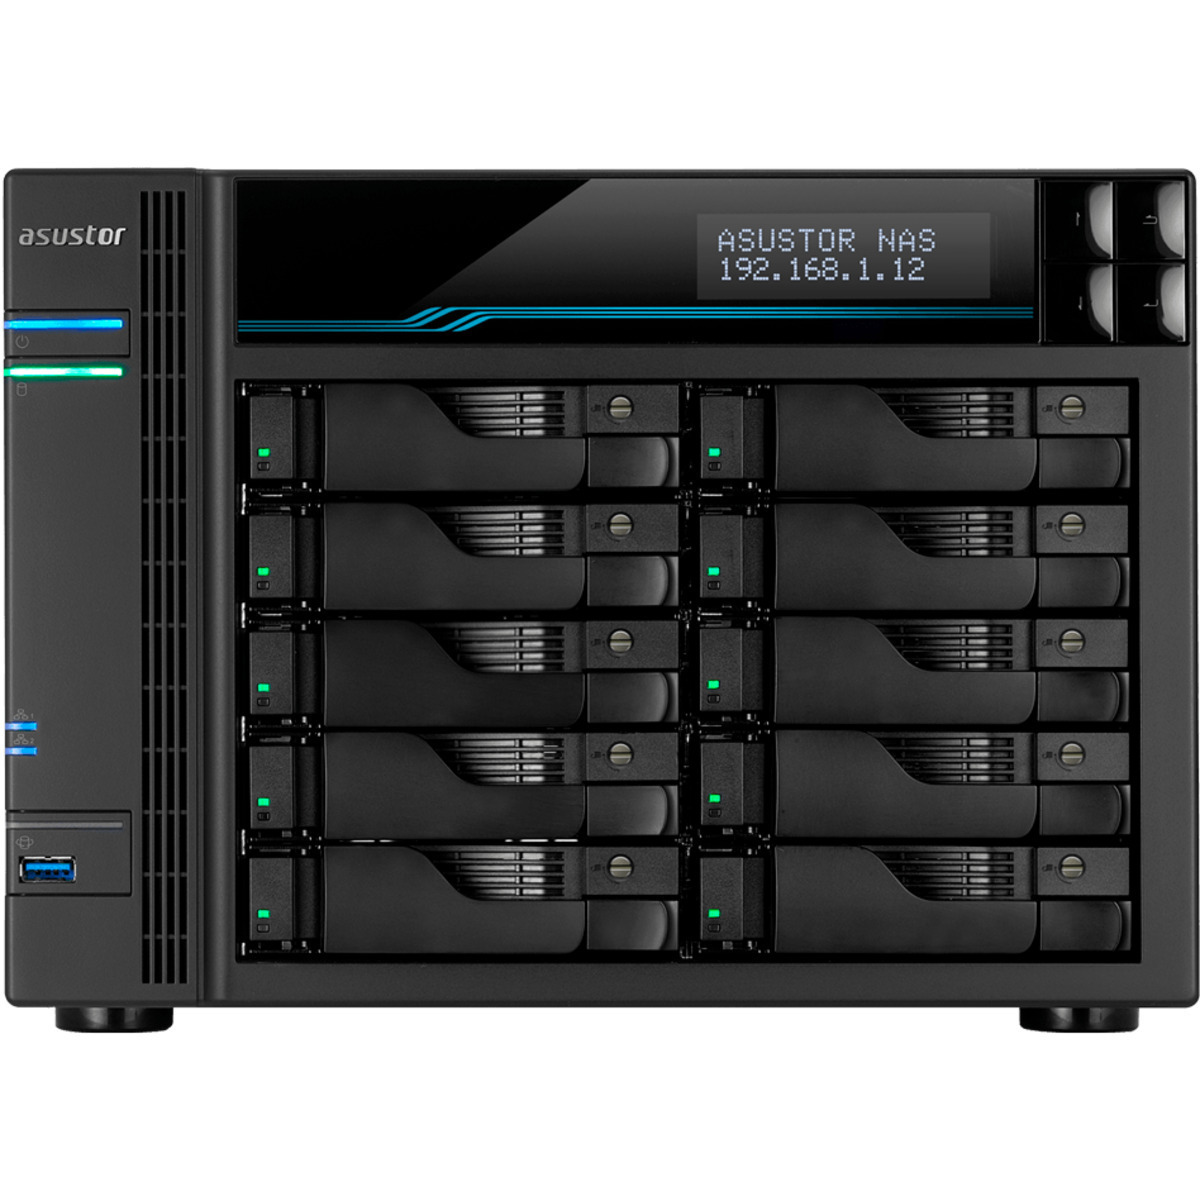 buy ASUSTOR AS7110T Lockerstor 10 Pro 40tb Desktop NAS - Network Attached Storage Device 10x4000gb Seagate BarraCuda ST4000DM004 3.5 7200rpm SATA 6Gb/s HDD CONSUMER Class Drives Installed - Burn-In Tested - nas headquarters buy network attached storage server device das new raid-5 free shipping usa spring sale AS7110T Lockerstor 10 Pro